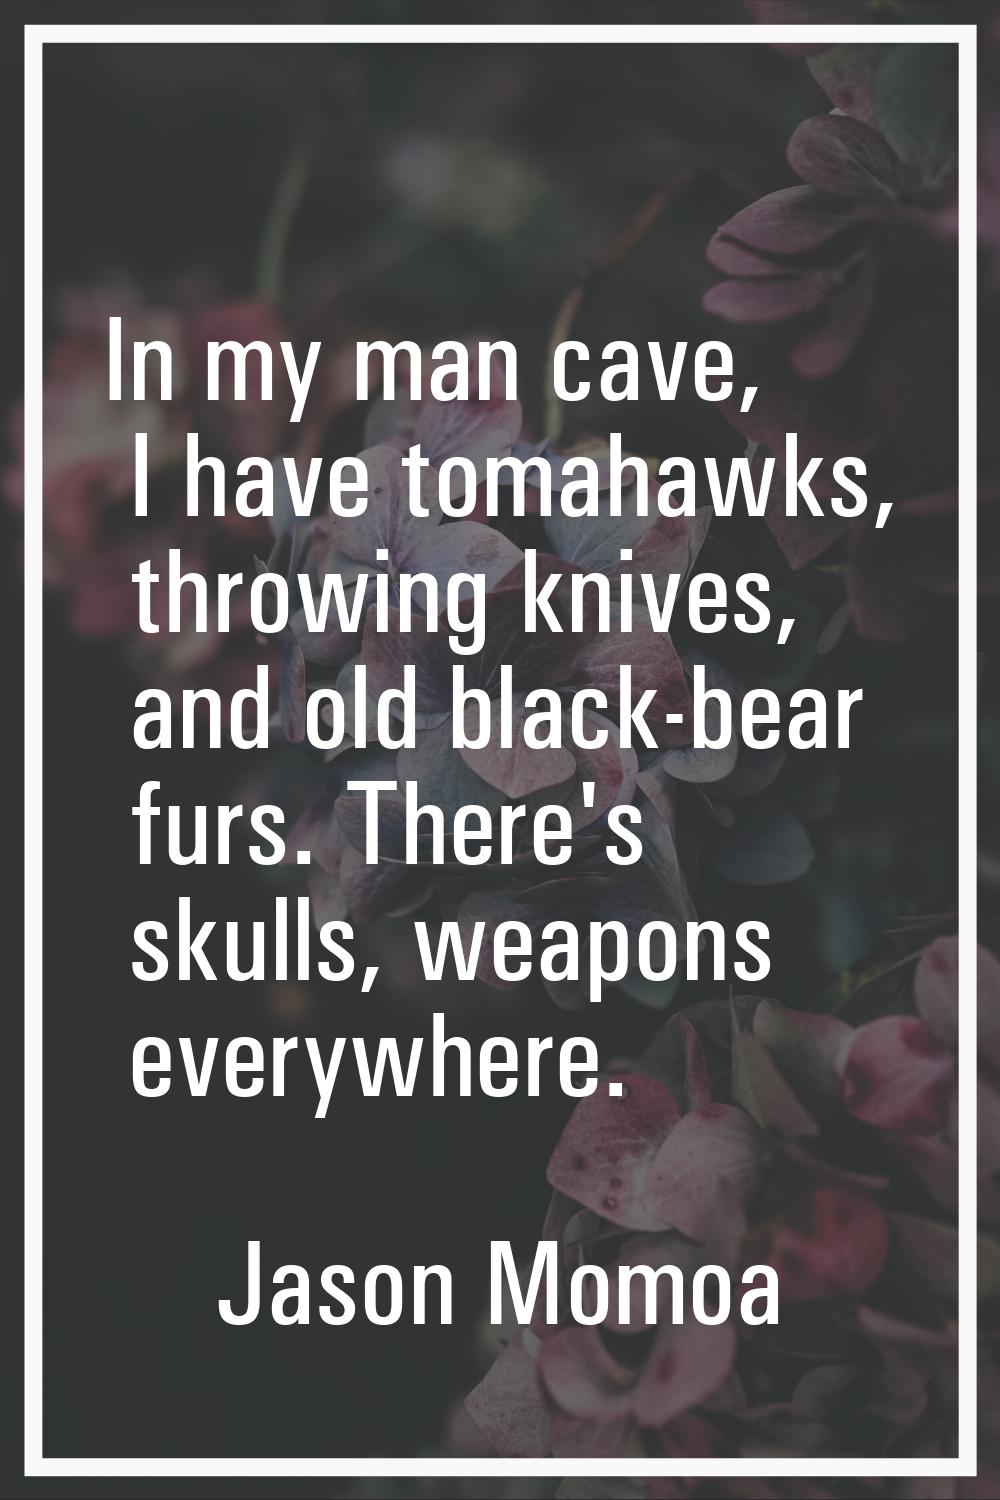 In my man cave, I have tomahawks, throwing knives, and old black-bear furs. There's skulls, weapons